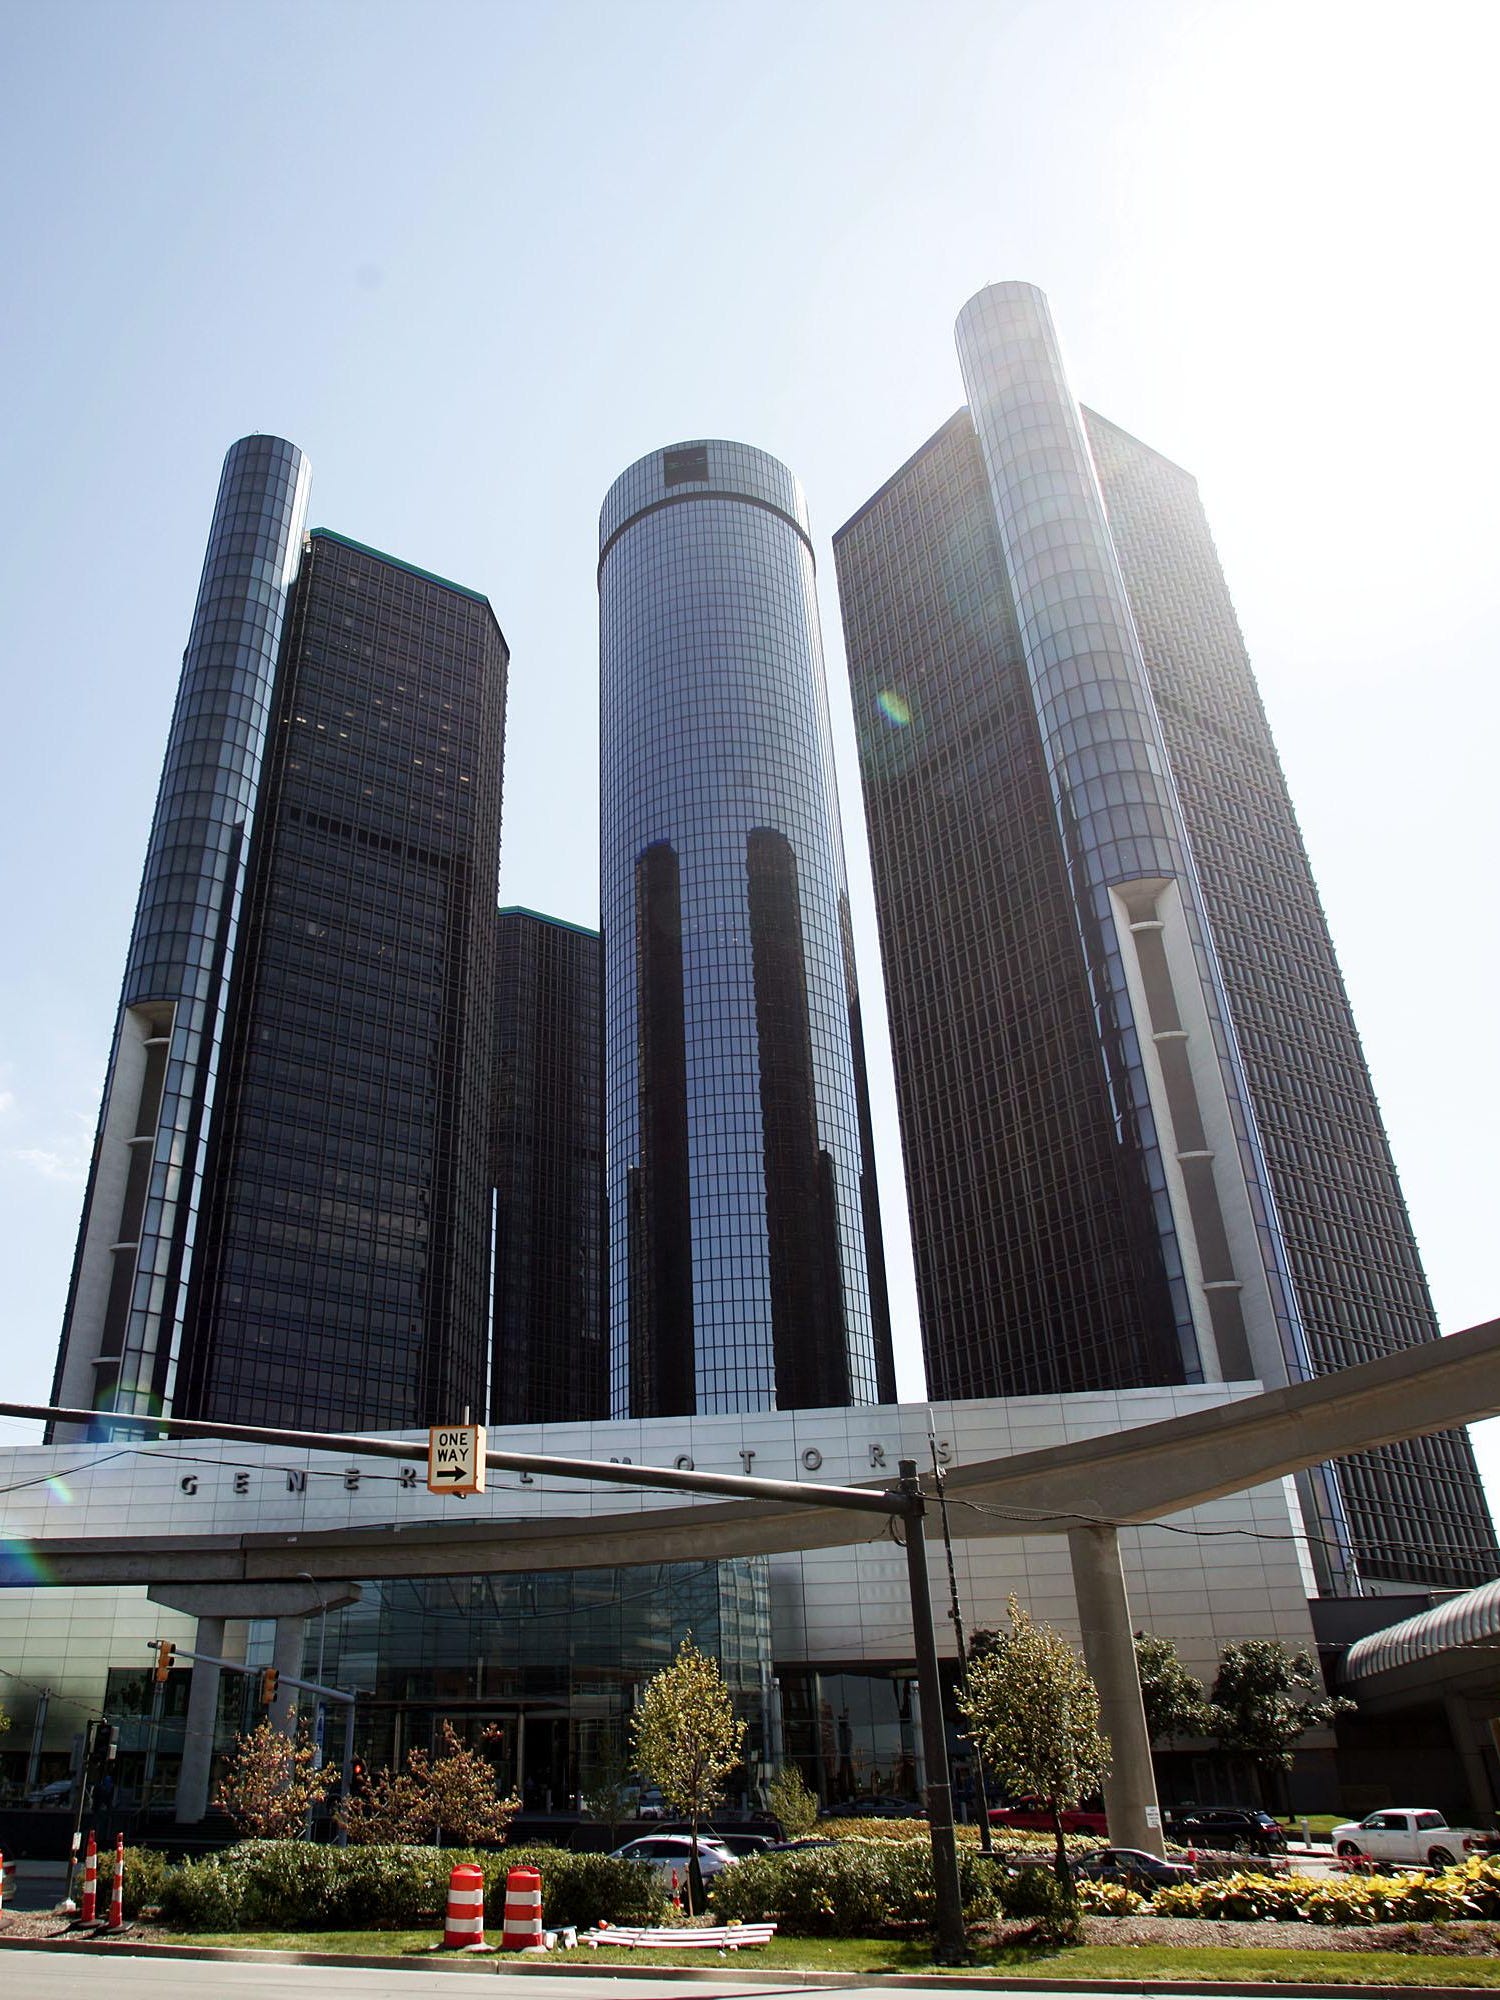 As part of a larger restructuring effort, GM will start salaried workforce reductions in earnest Monday.